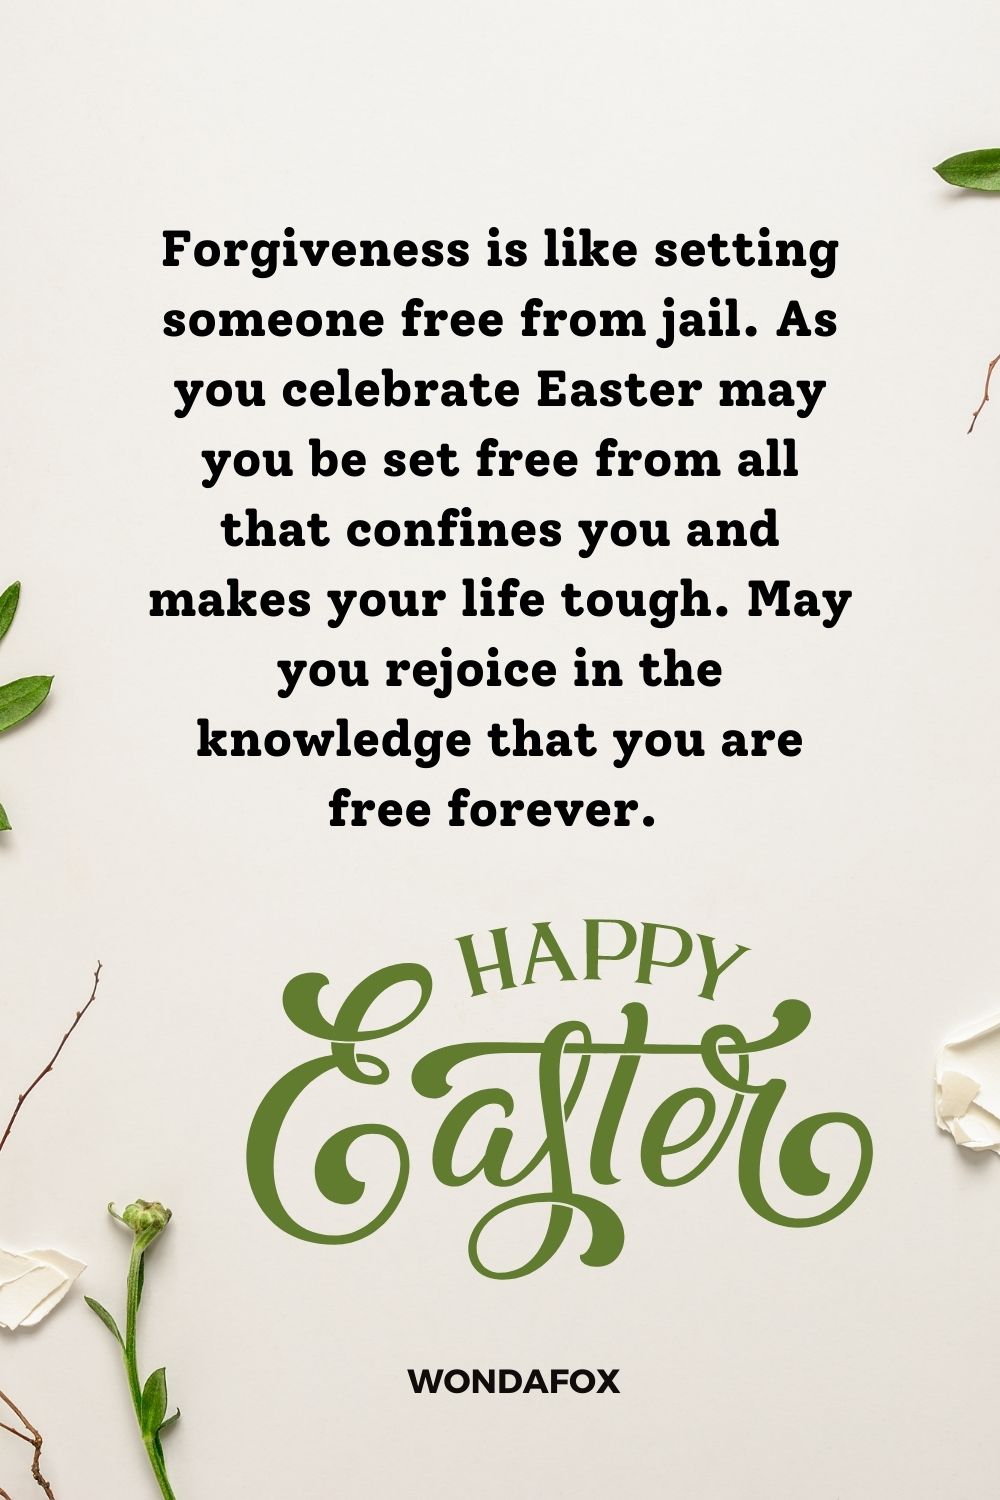 Forgiveness is like setting someone free from jail. As you celebrate Easter may you be set free from all that confines you and makes your life tough. May you rejoice in the knowledge that you are free forever. Happy Easter.